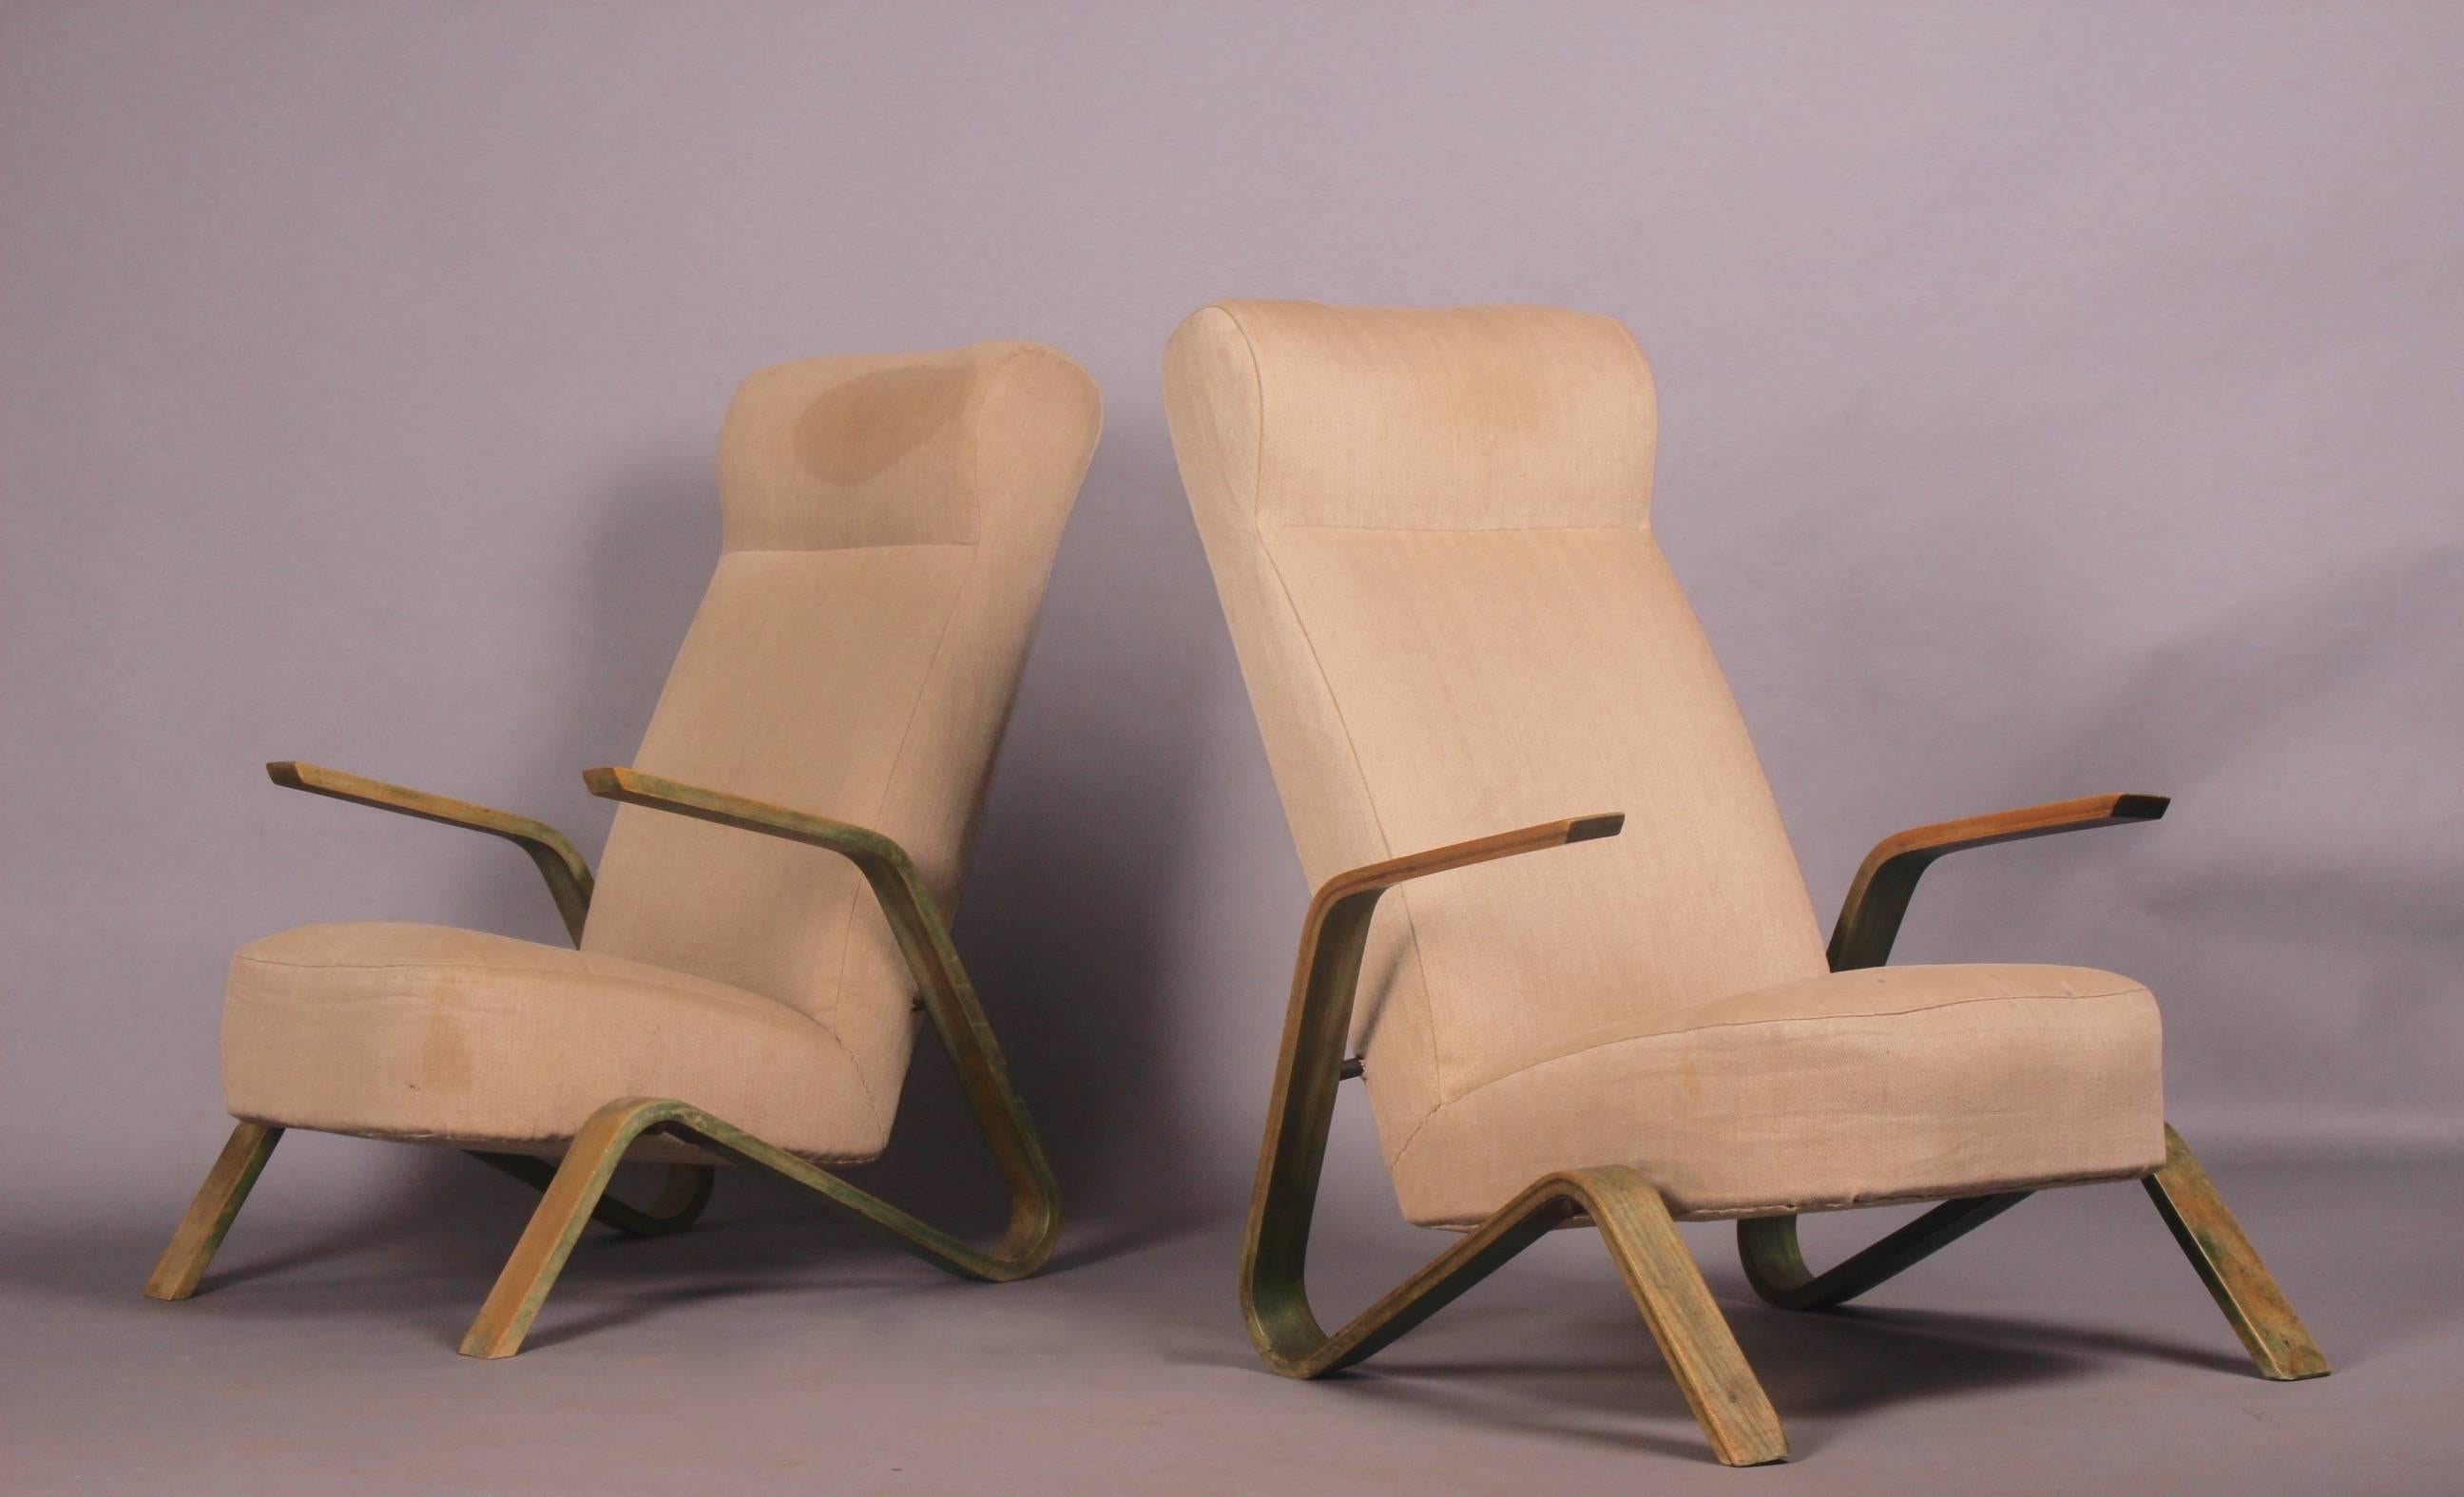 Mid-20th Century Pair of Grasshopper Chairs for the Zurich Airport